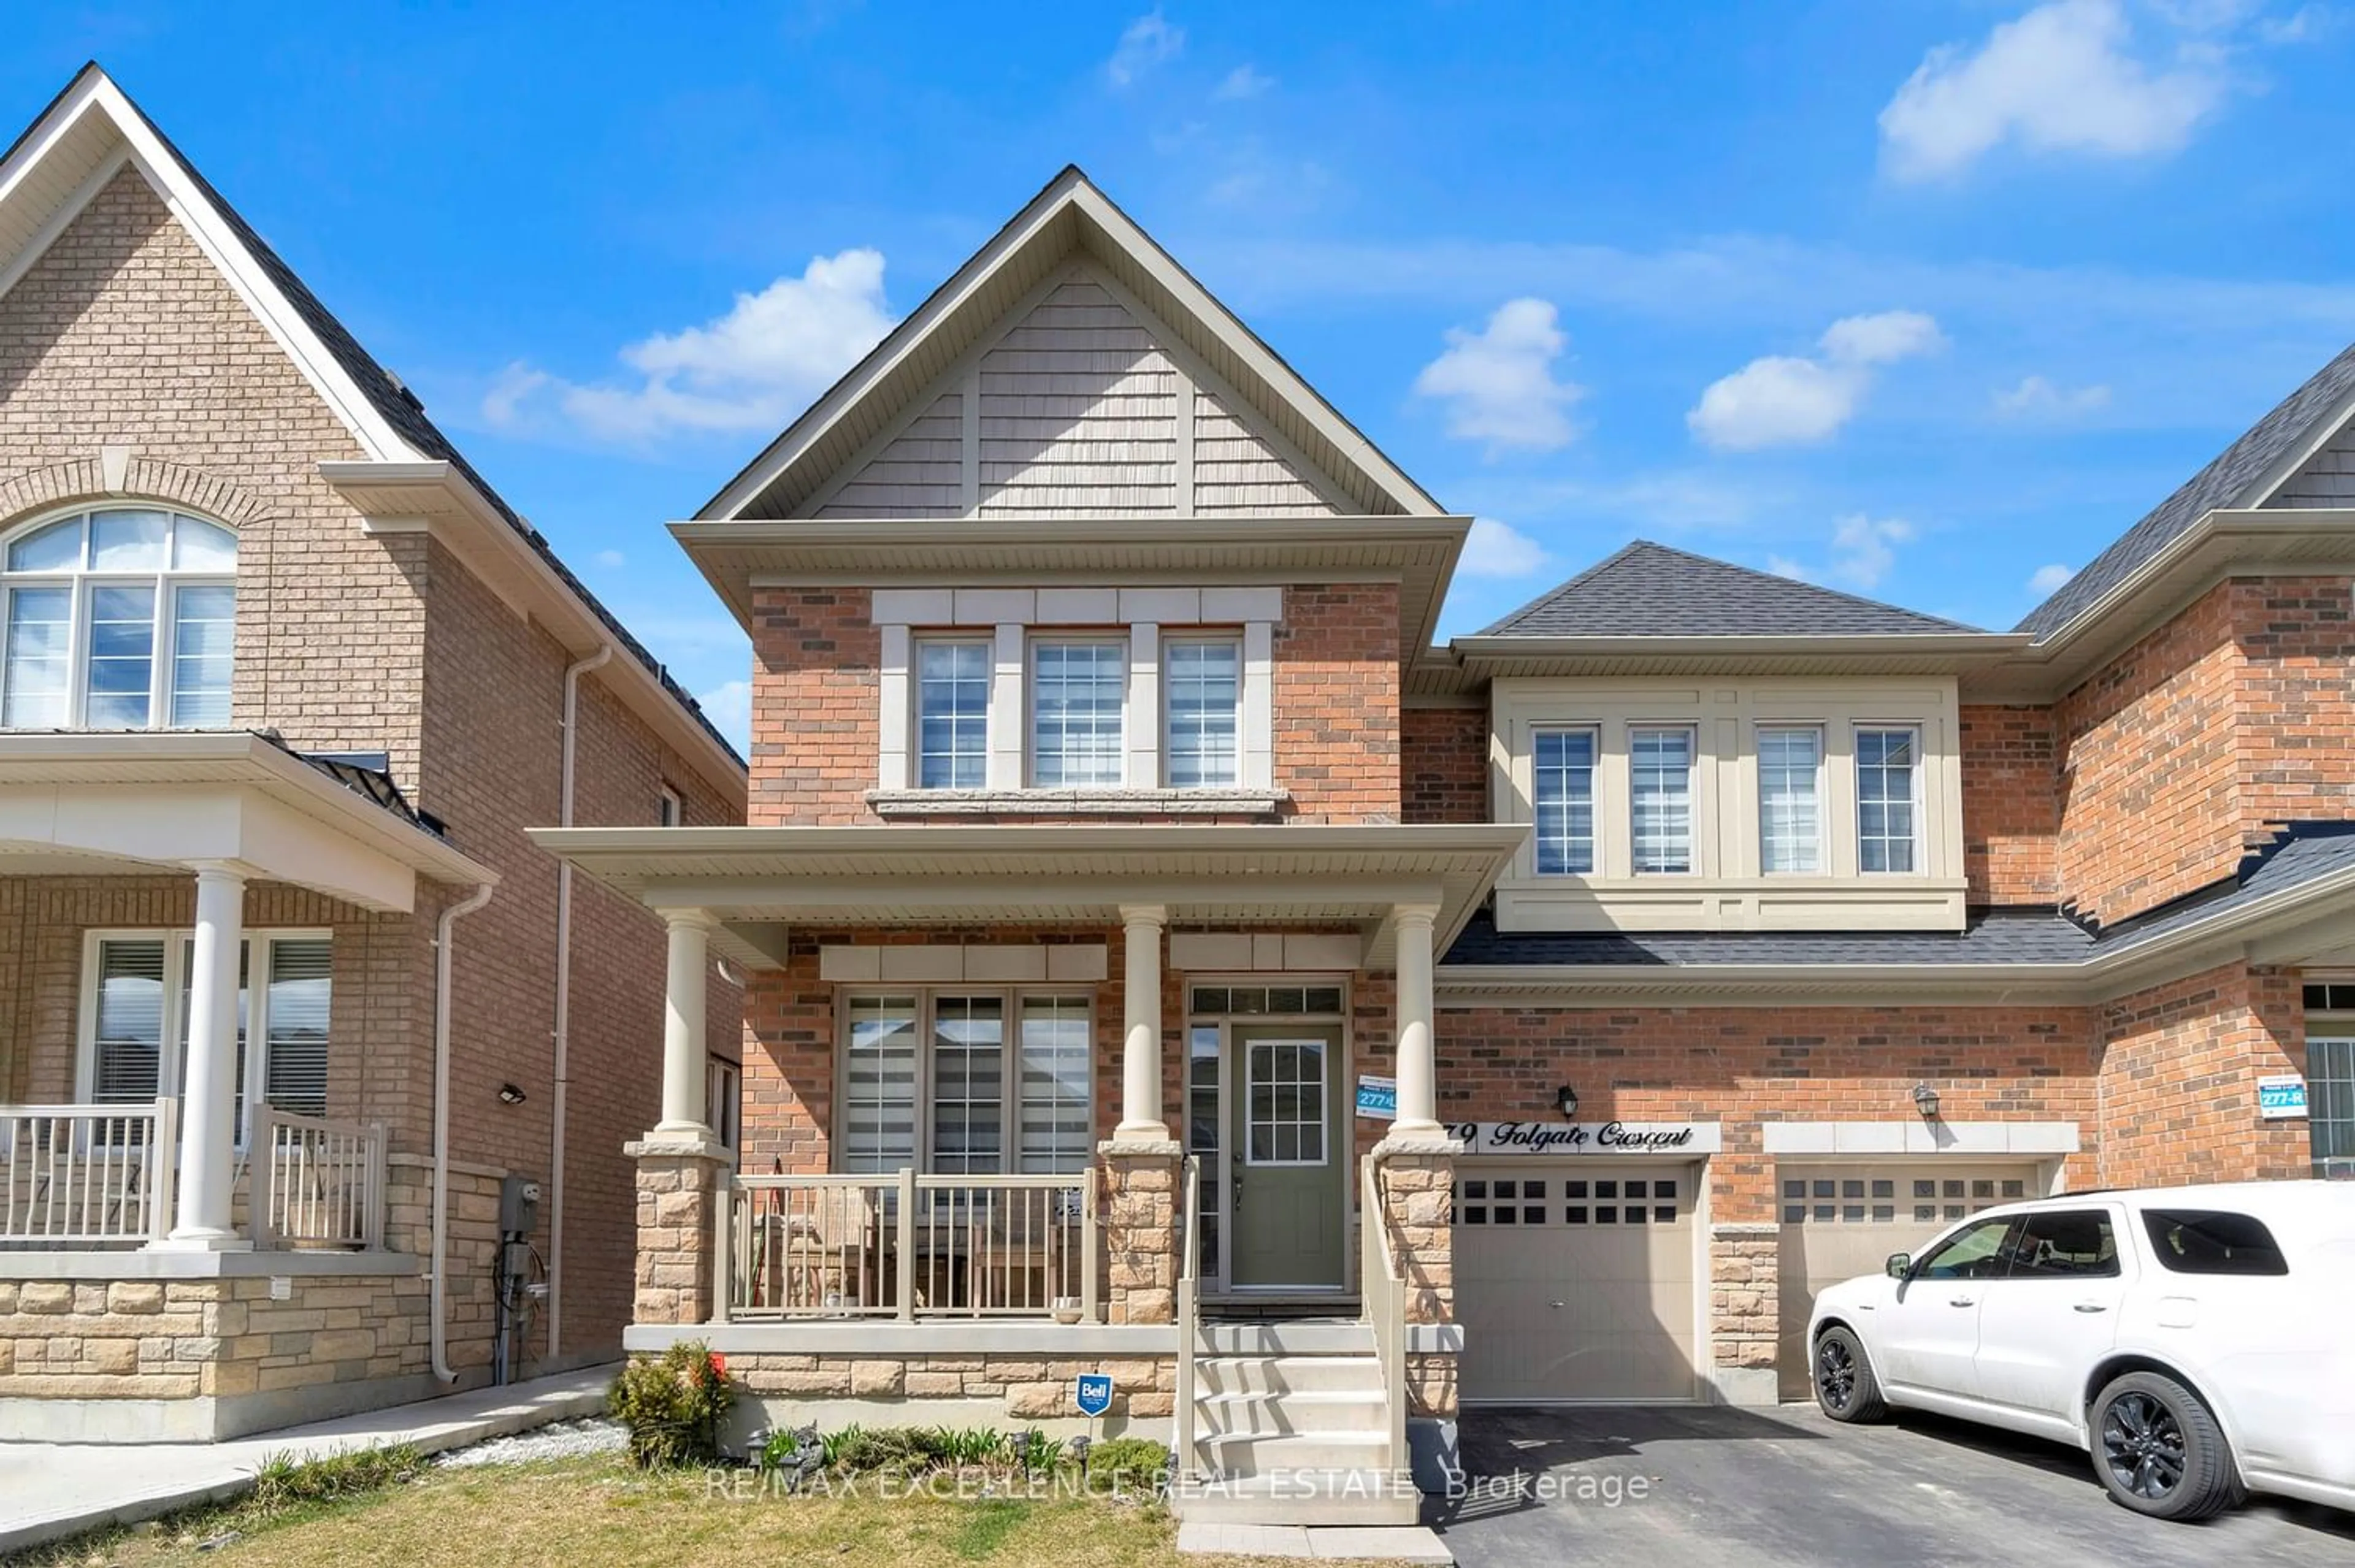 Home with brick exterior material for 79 Folgate Cres, Brampton Ontario L6R 4A7